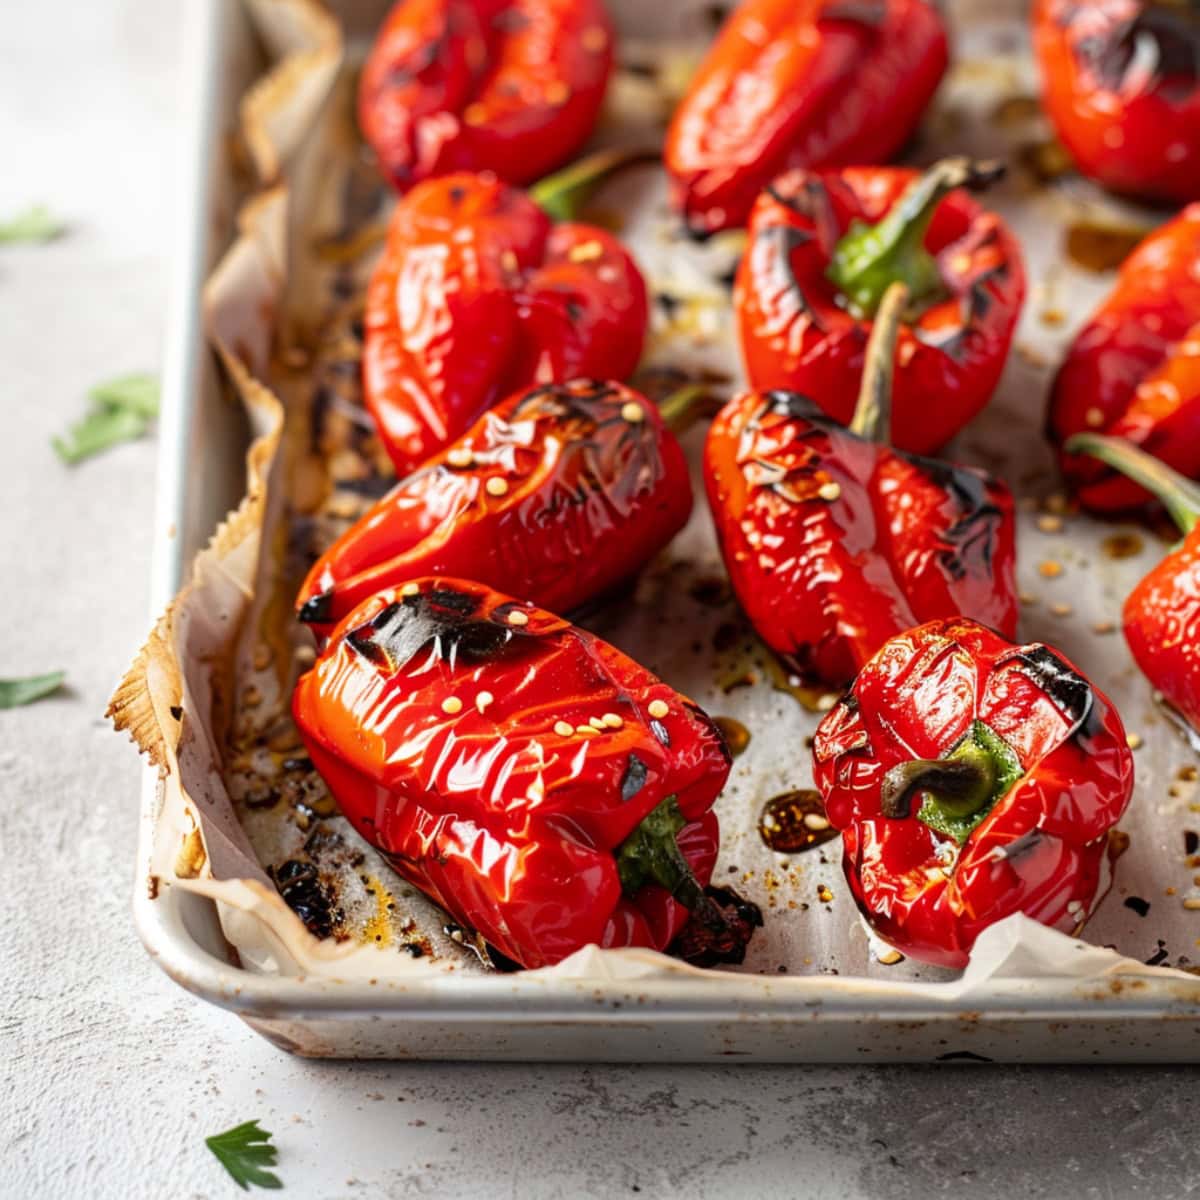 Roasted red peppers in a baking sheet.